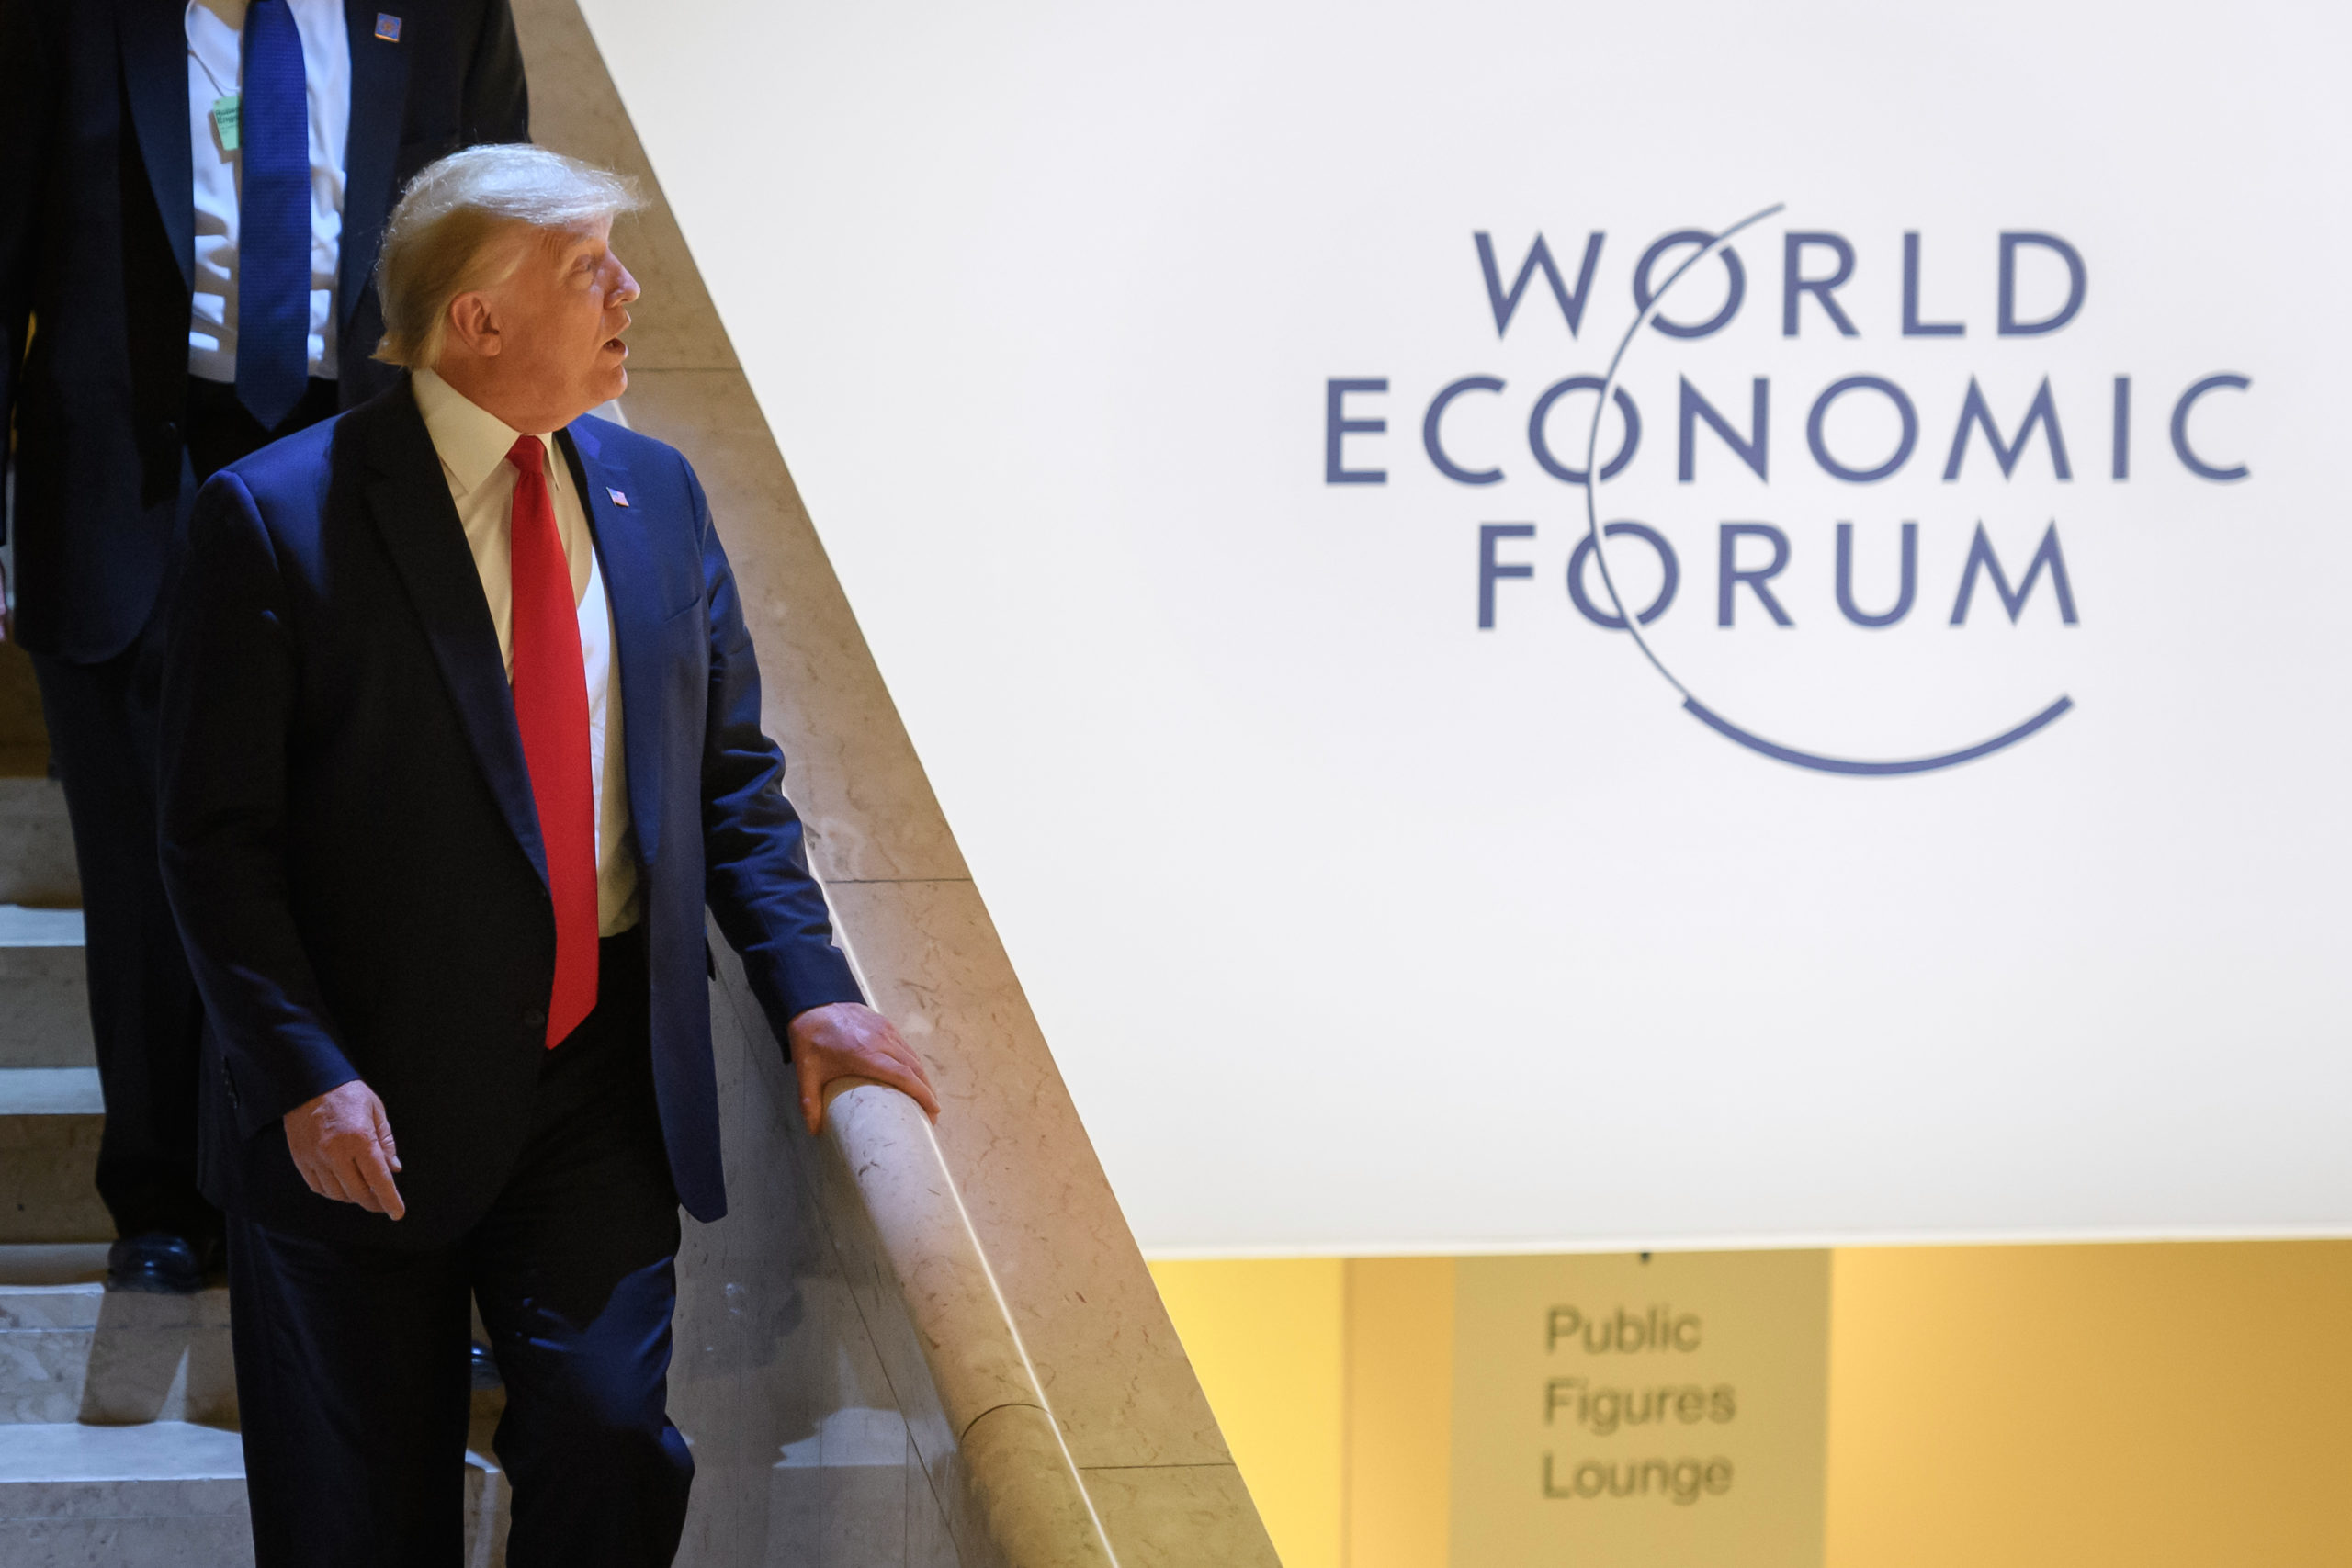 US president Donald Trump leaves the Congress center during the World Economic Forum (WEF) annual meeting in Davos, on January 21, 2020. (Photo by Fabrice COFFRINI / AFP) (Photo by FABRICE COFFRINI/AFP via Getty Images)